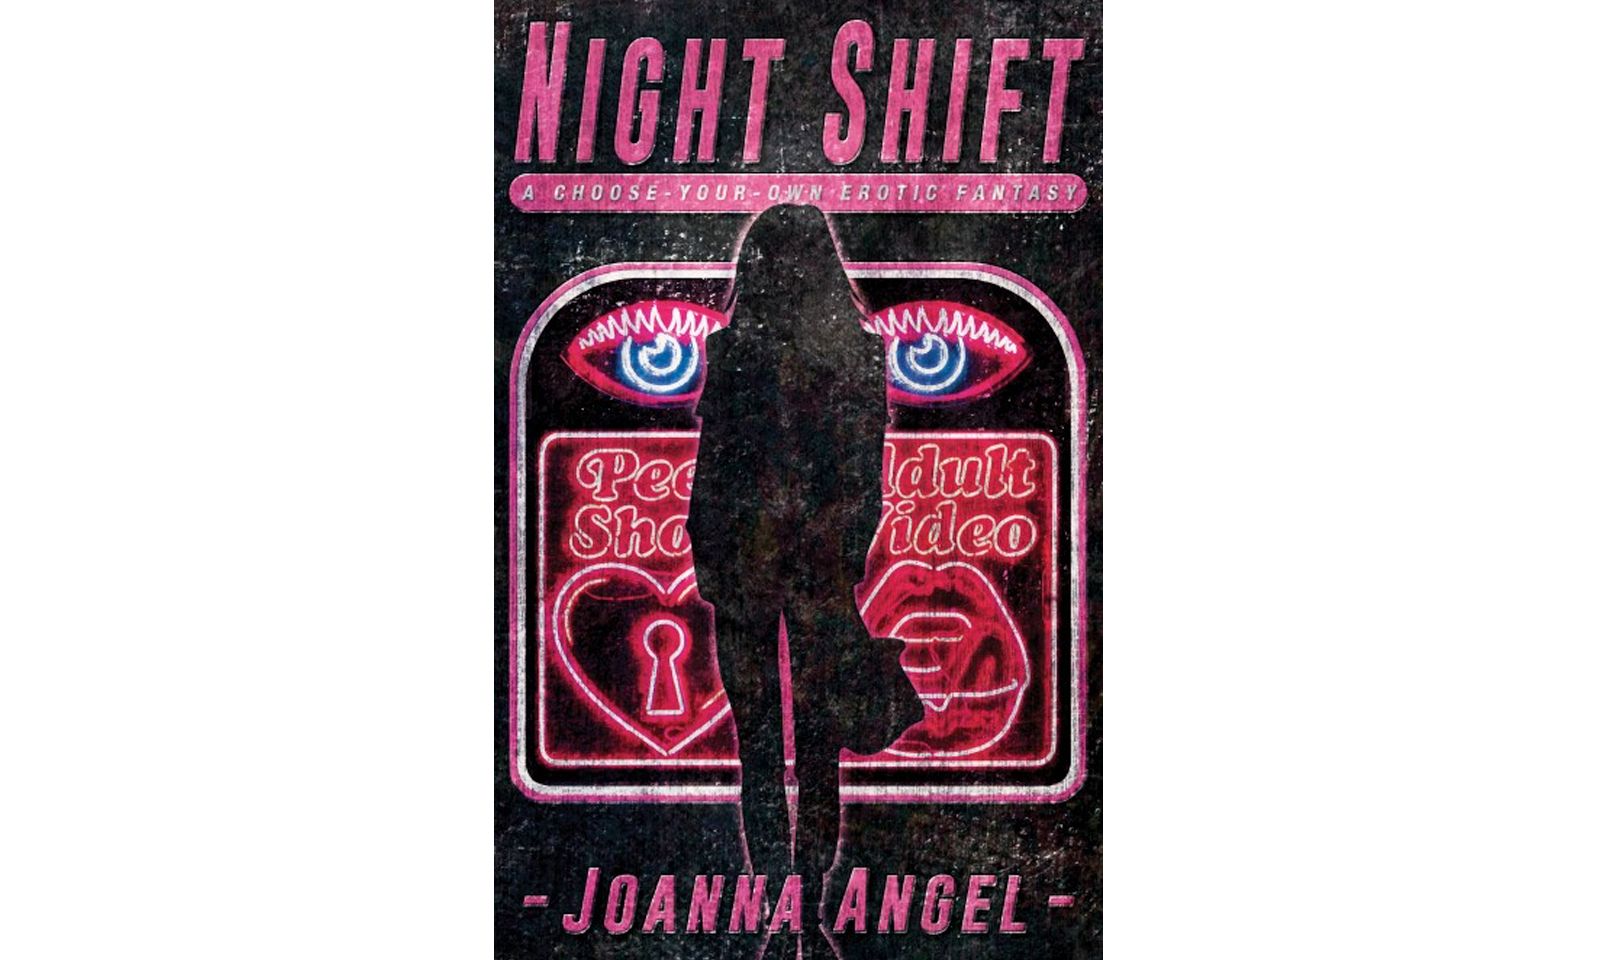 Cleis Press Publishes Joanna Angel’s ‘Night Shift’